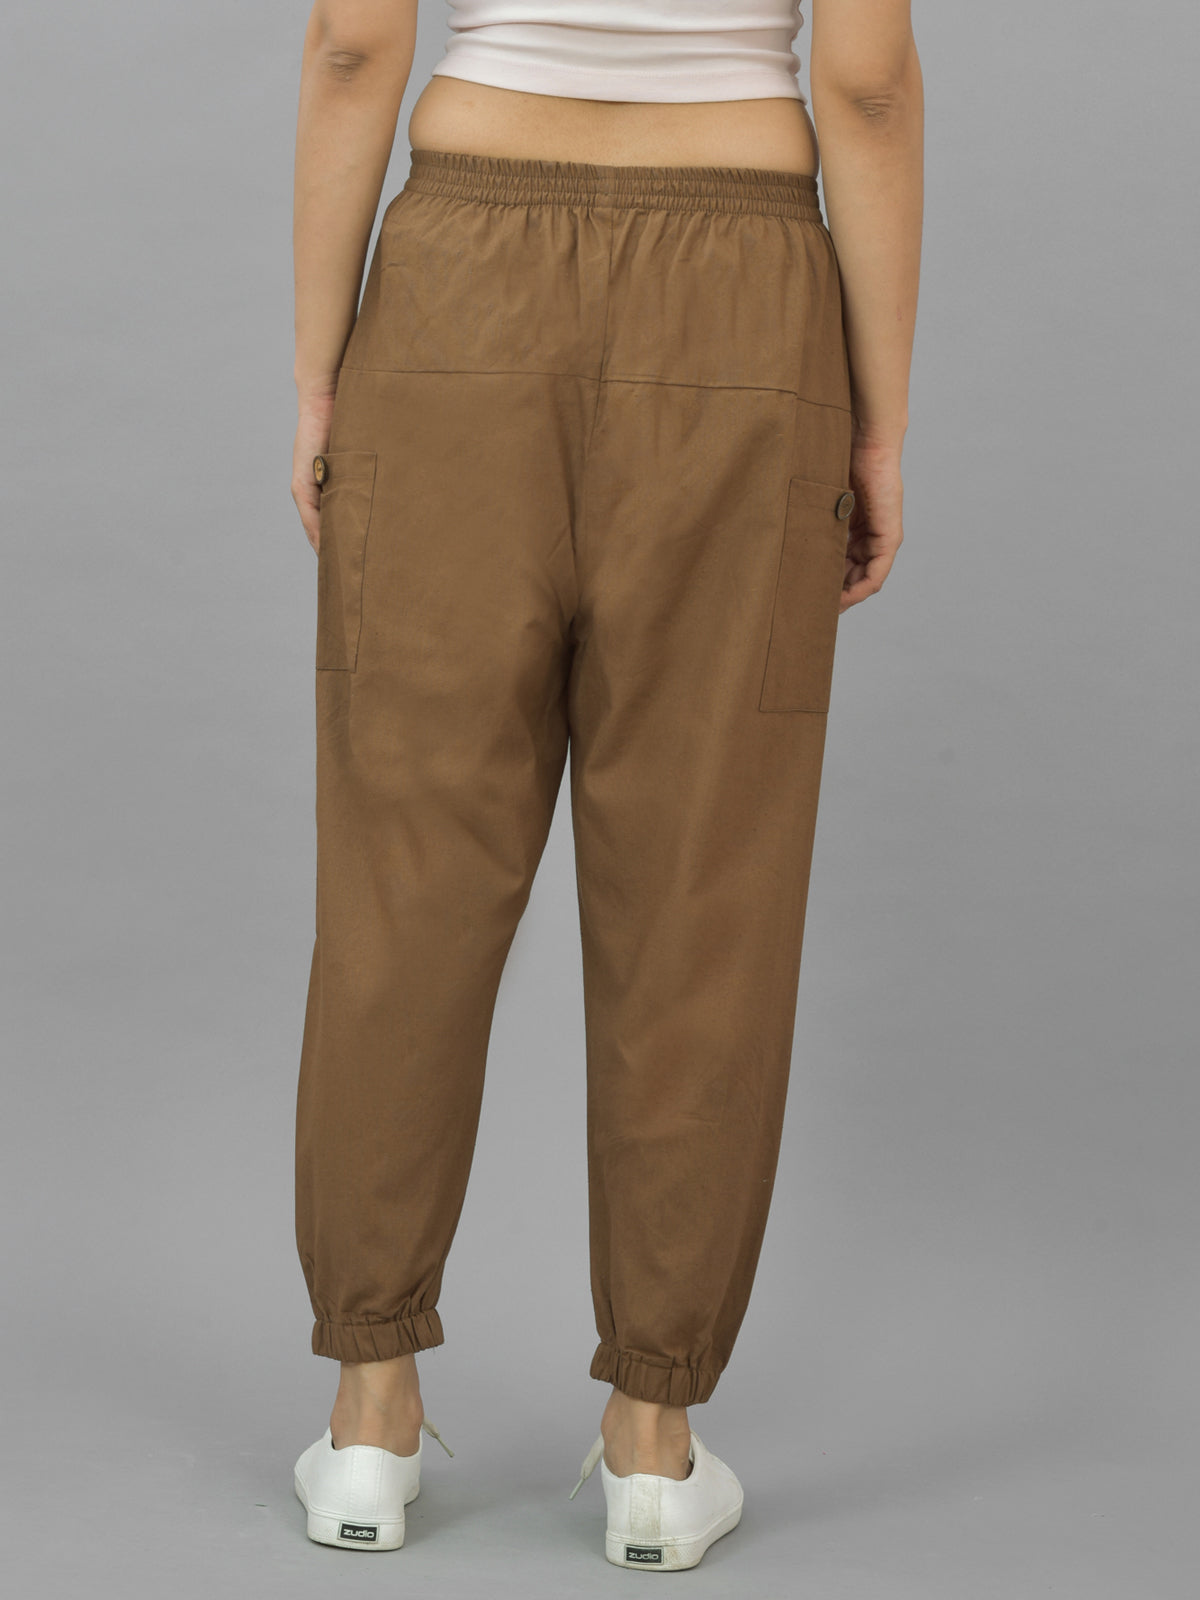 Combo Pack Of Womens Beige And Brown Four Pocket Cotton Cargo Pants